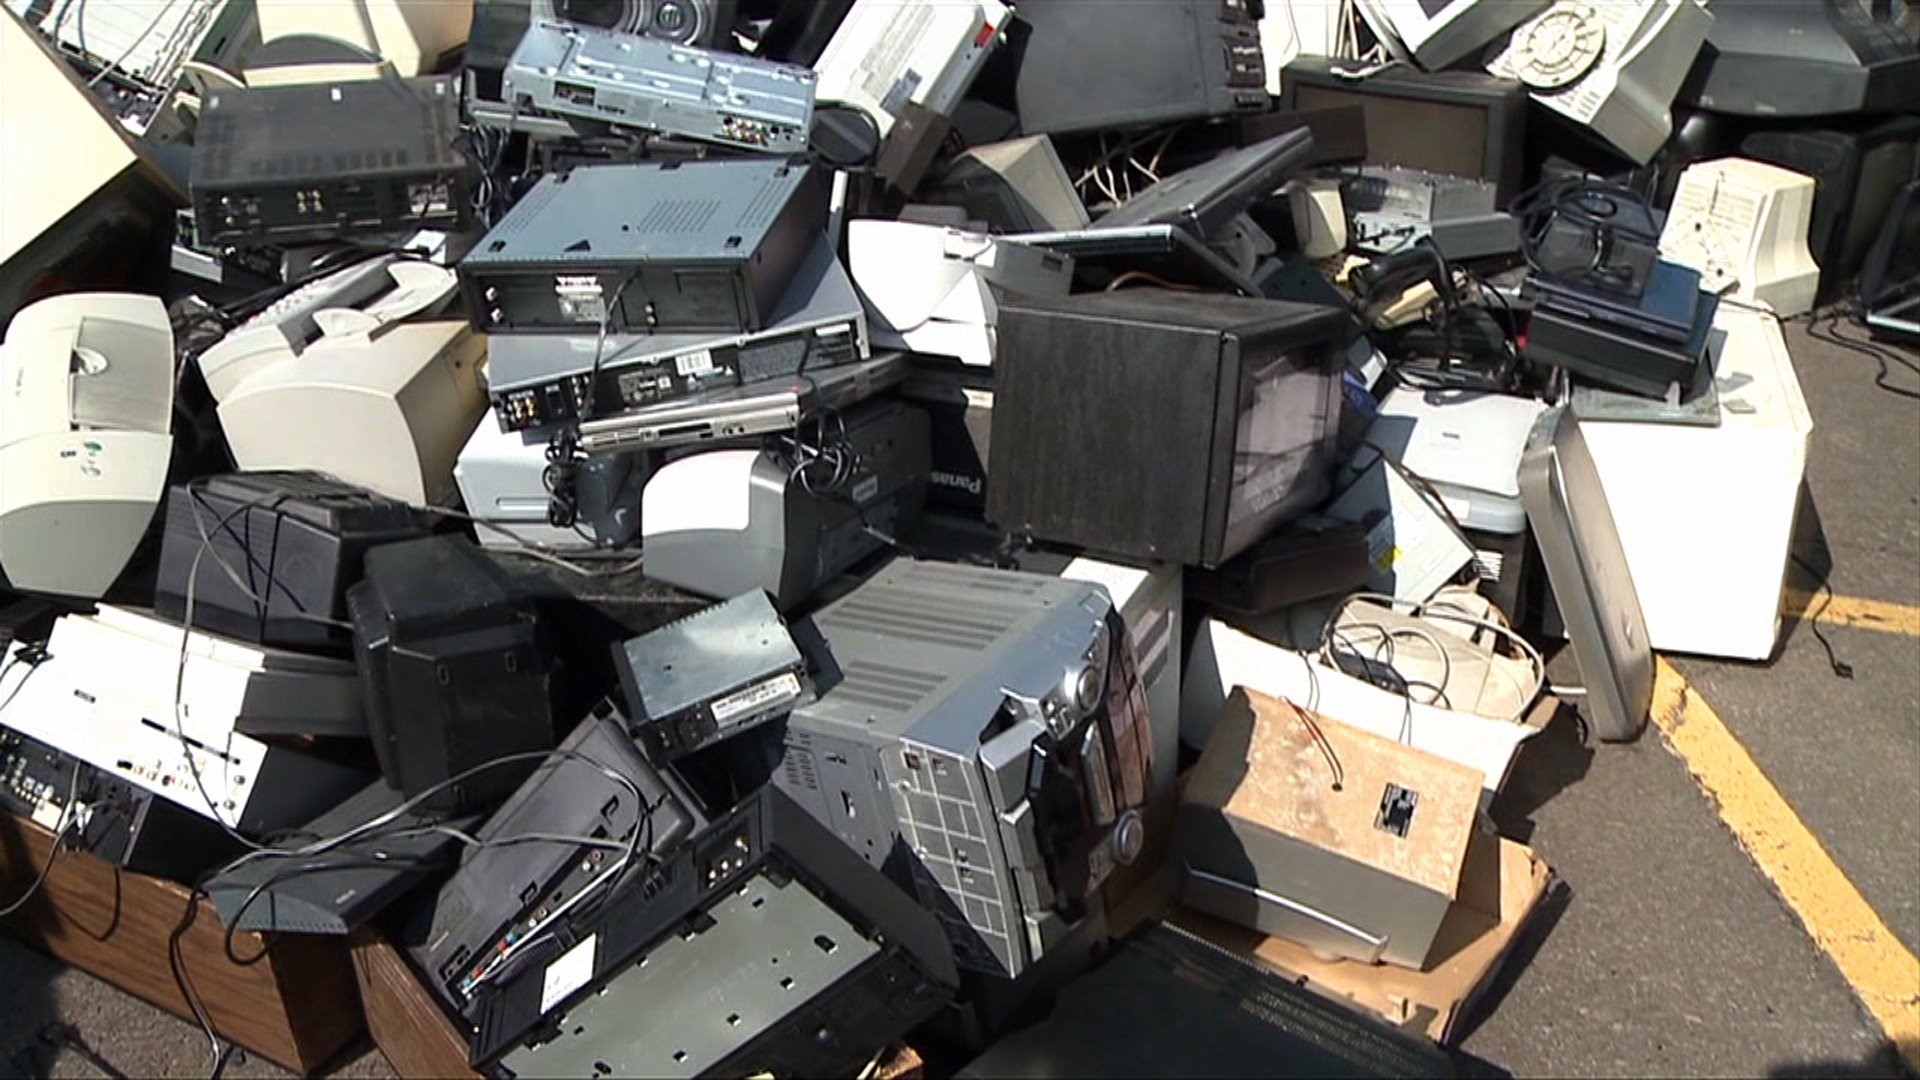 Luzerne County Suspends Electronics Recycling Program